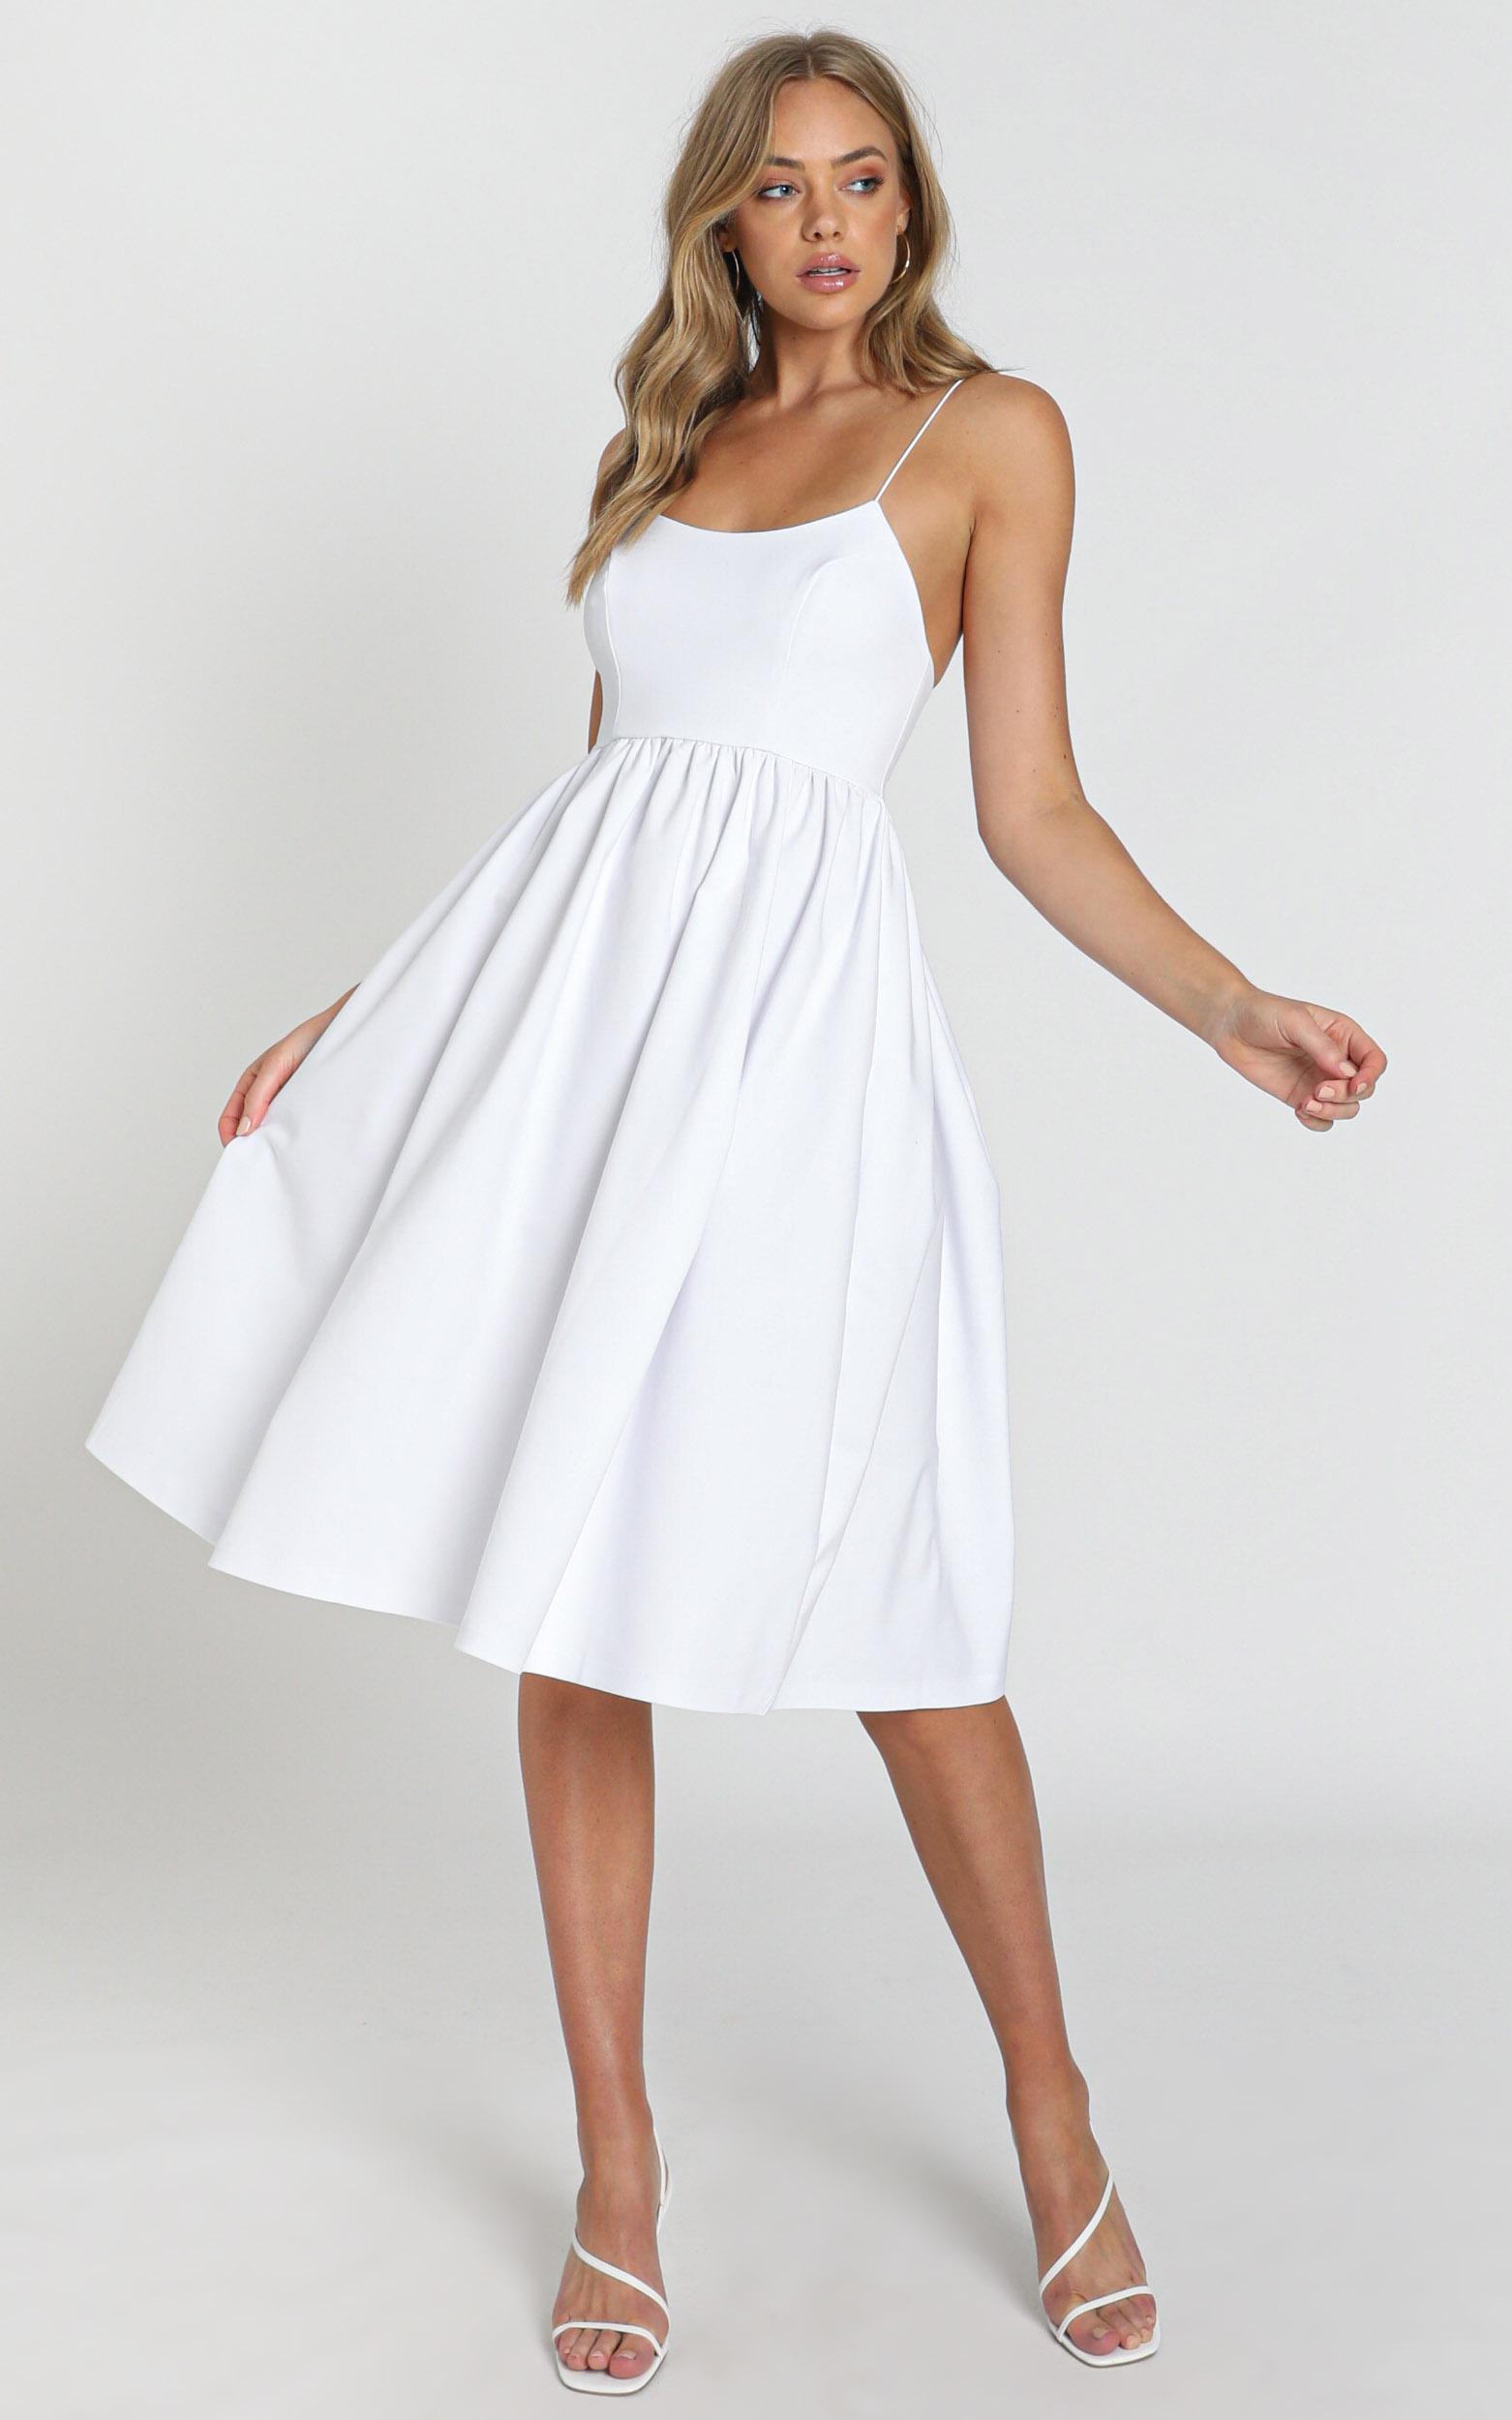 Wild Nights Dress in white - 6 (XS), White, hi-res image number null